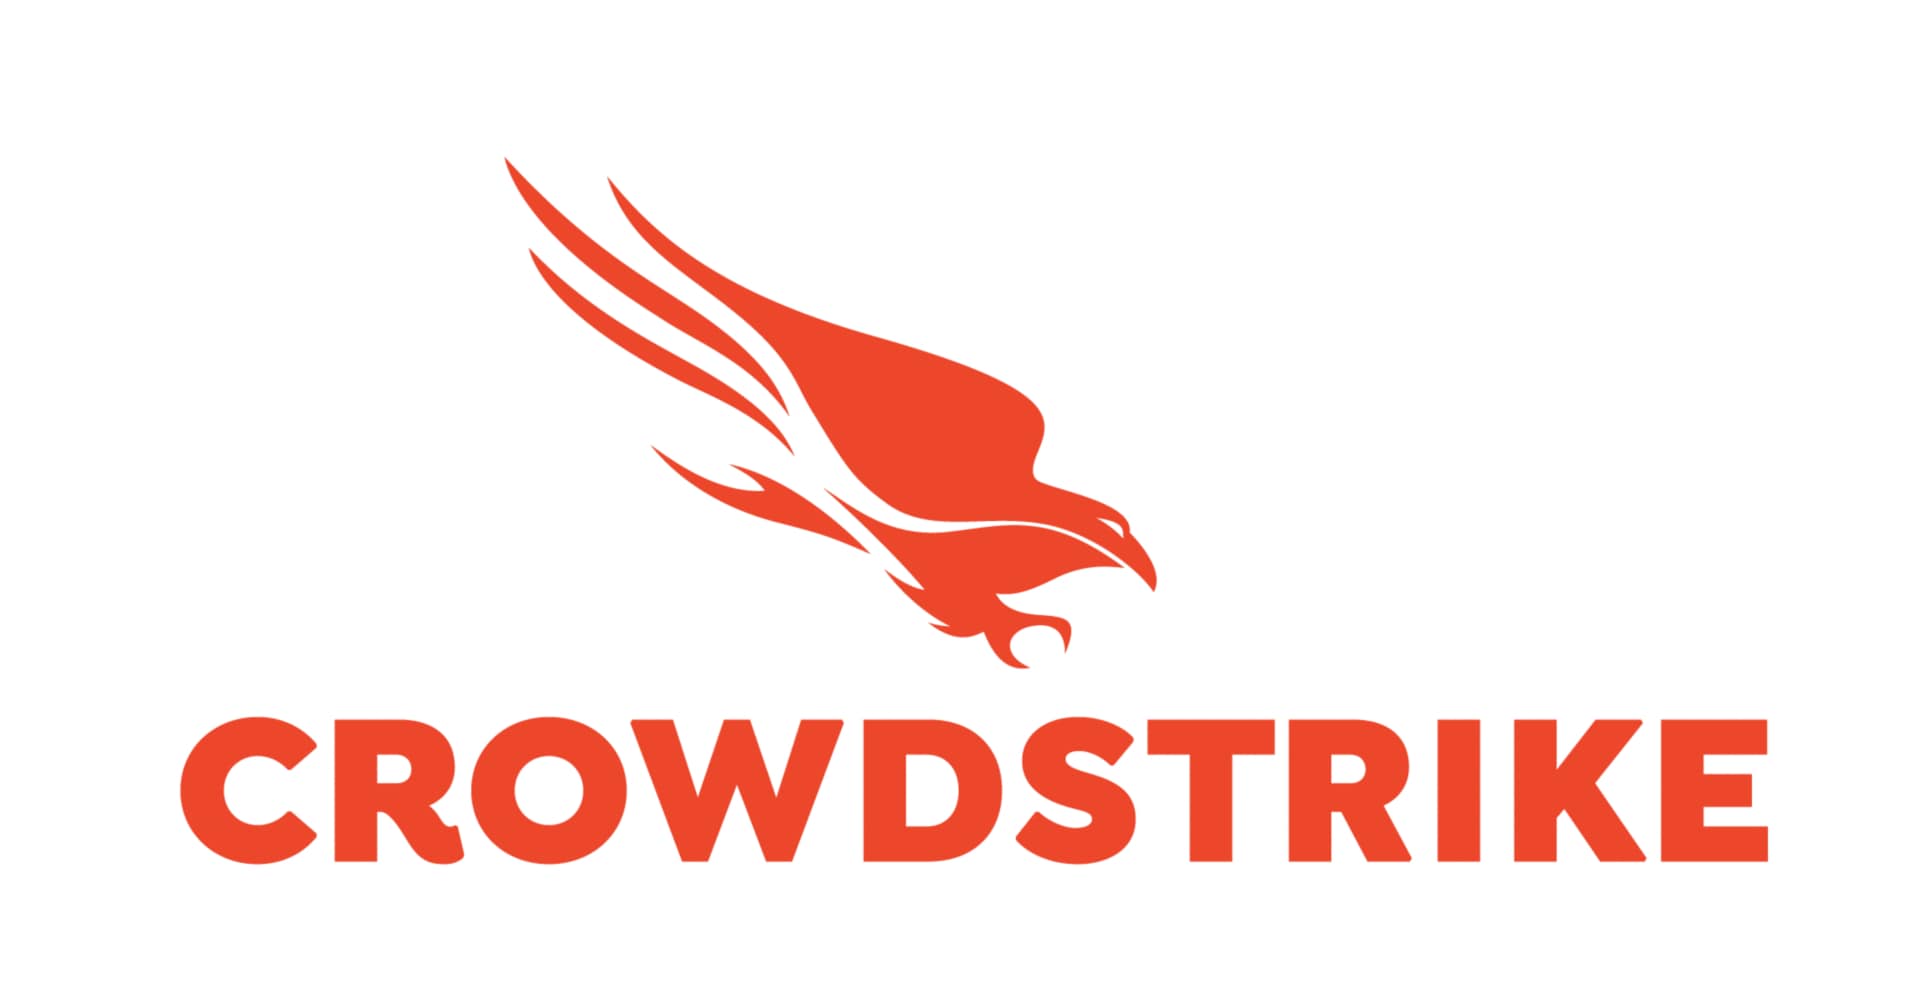 CrowdStrike 14-Month Falcon Firewall Management Software  (1-149 Licenses)